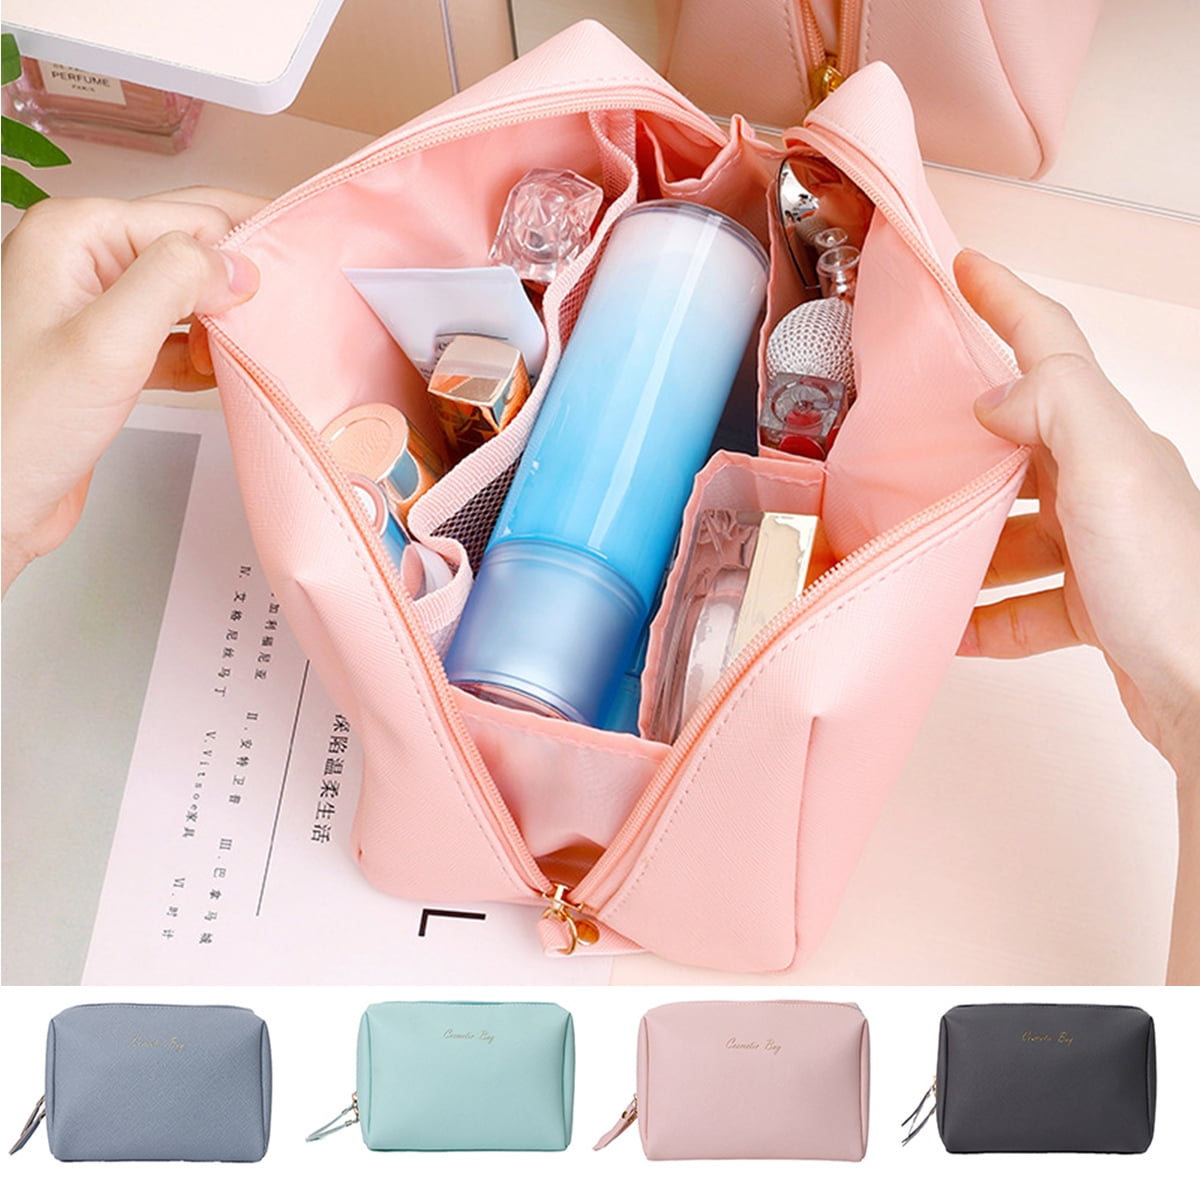  Waterproof Mini Makeup Bag Pouch for Purse,Small Cosmetic  Travel Bag Pouch Nylon Toiletry Organizers Bag for Women Girls,Cute Mini  Zipper Pouch Preppy Coin Purse for School Work(Mini-Chocolate) : Beauty 